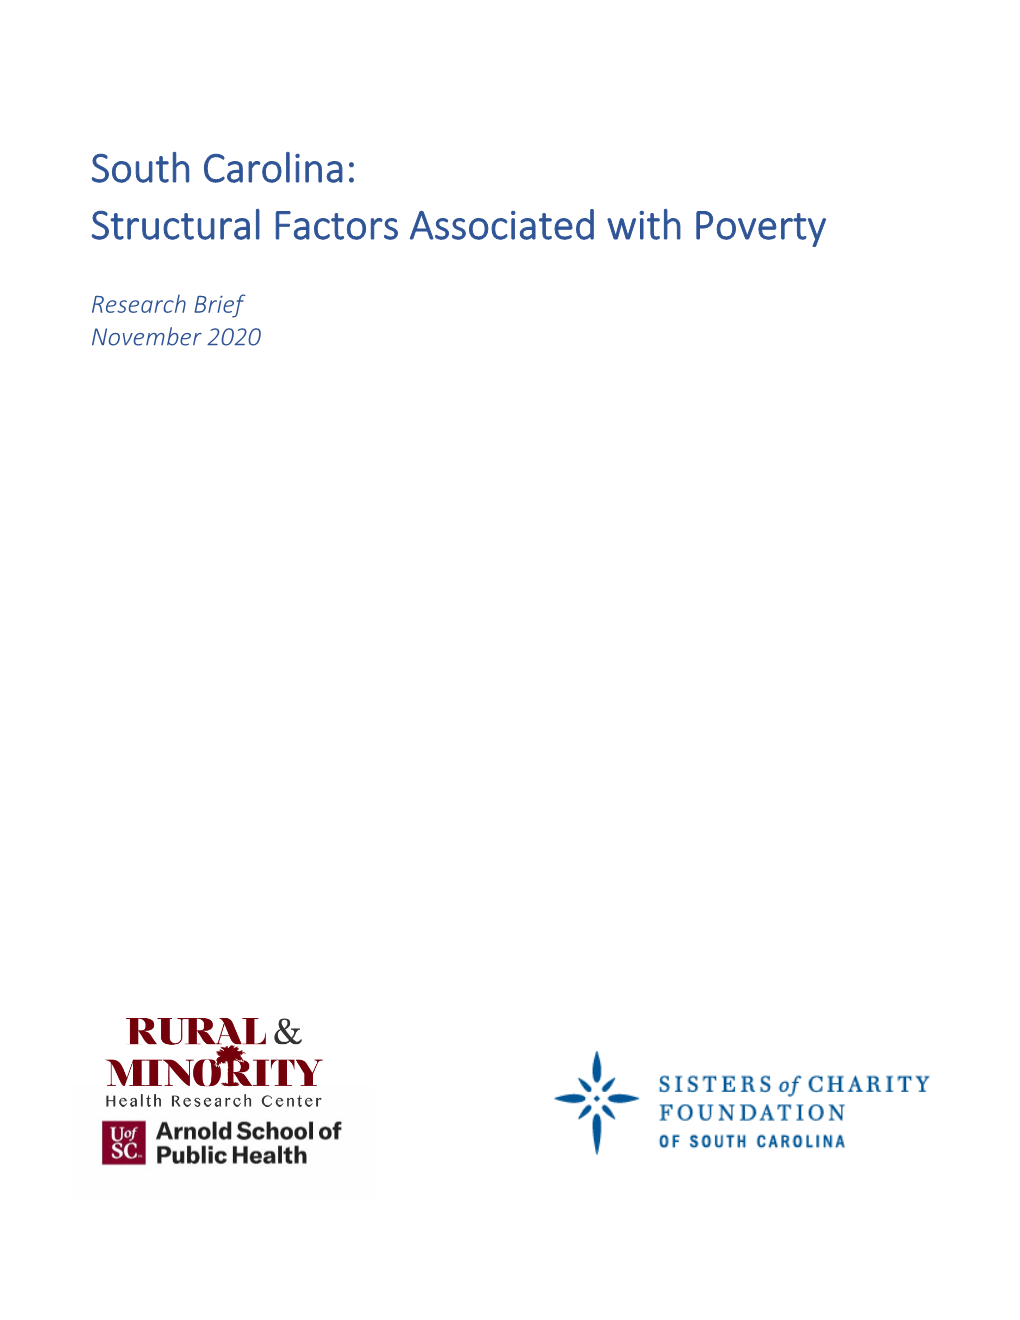 South Carolina Structural Factors Associated with Poverty Research